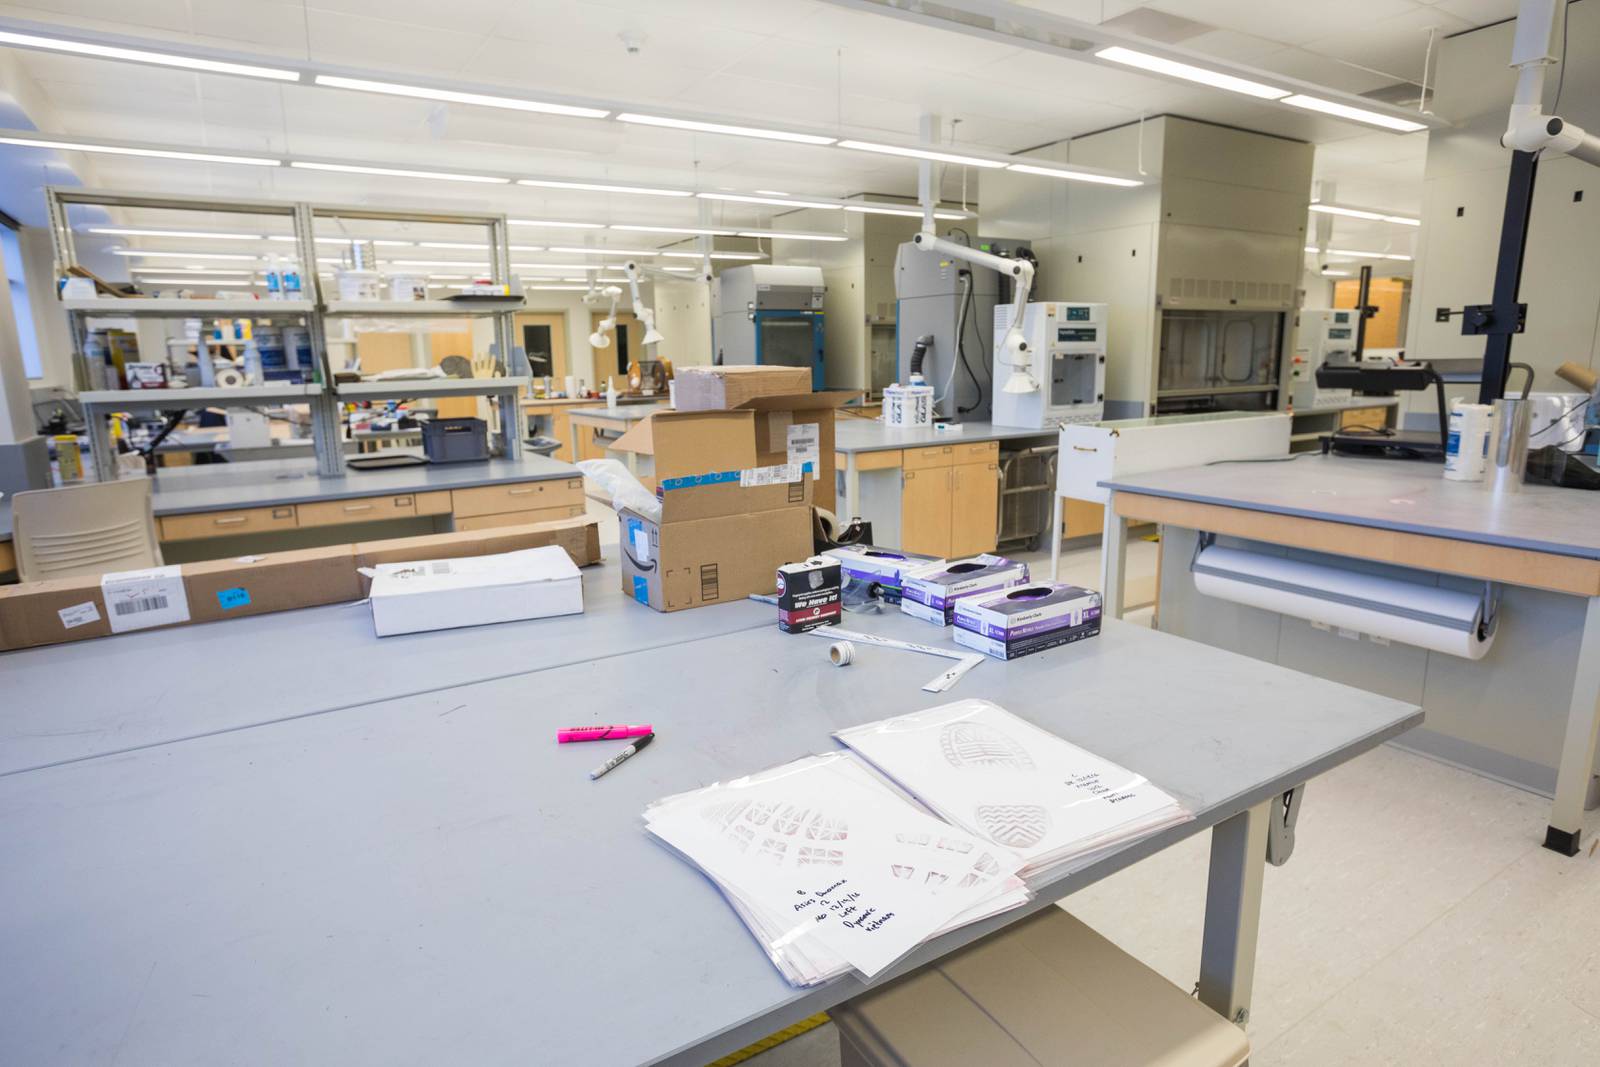 audit-finds-new-90-million-alaska-crime-lab-hasn-t-met-expectations-anchorage-daily-news